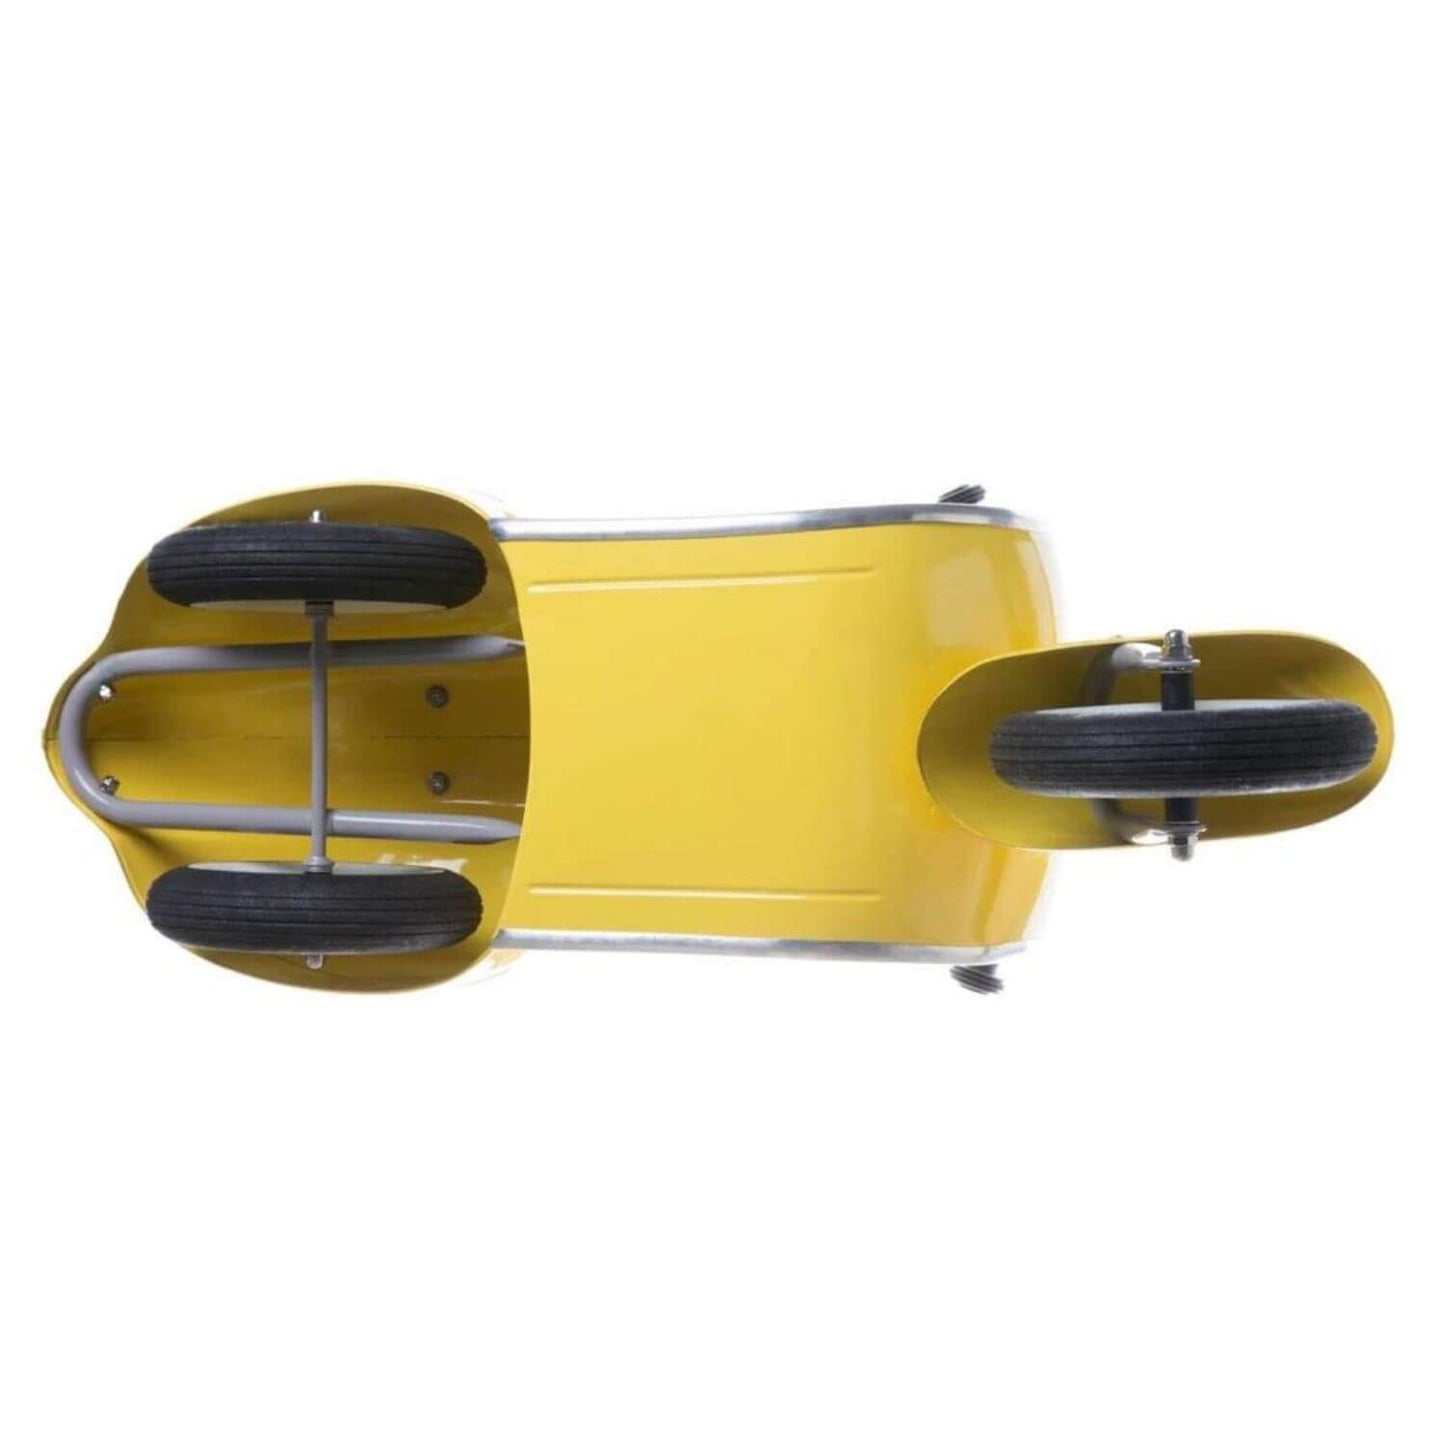 Primo Classic Ride-On Scooter Yellow - Bottom